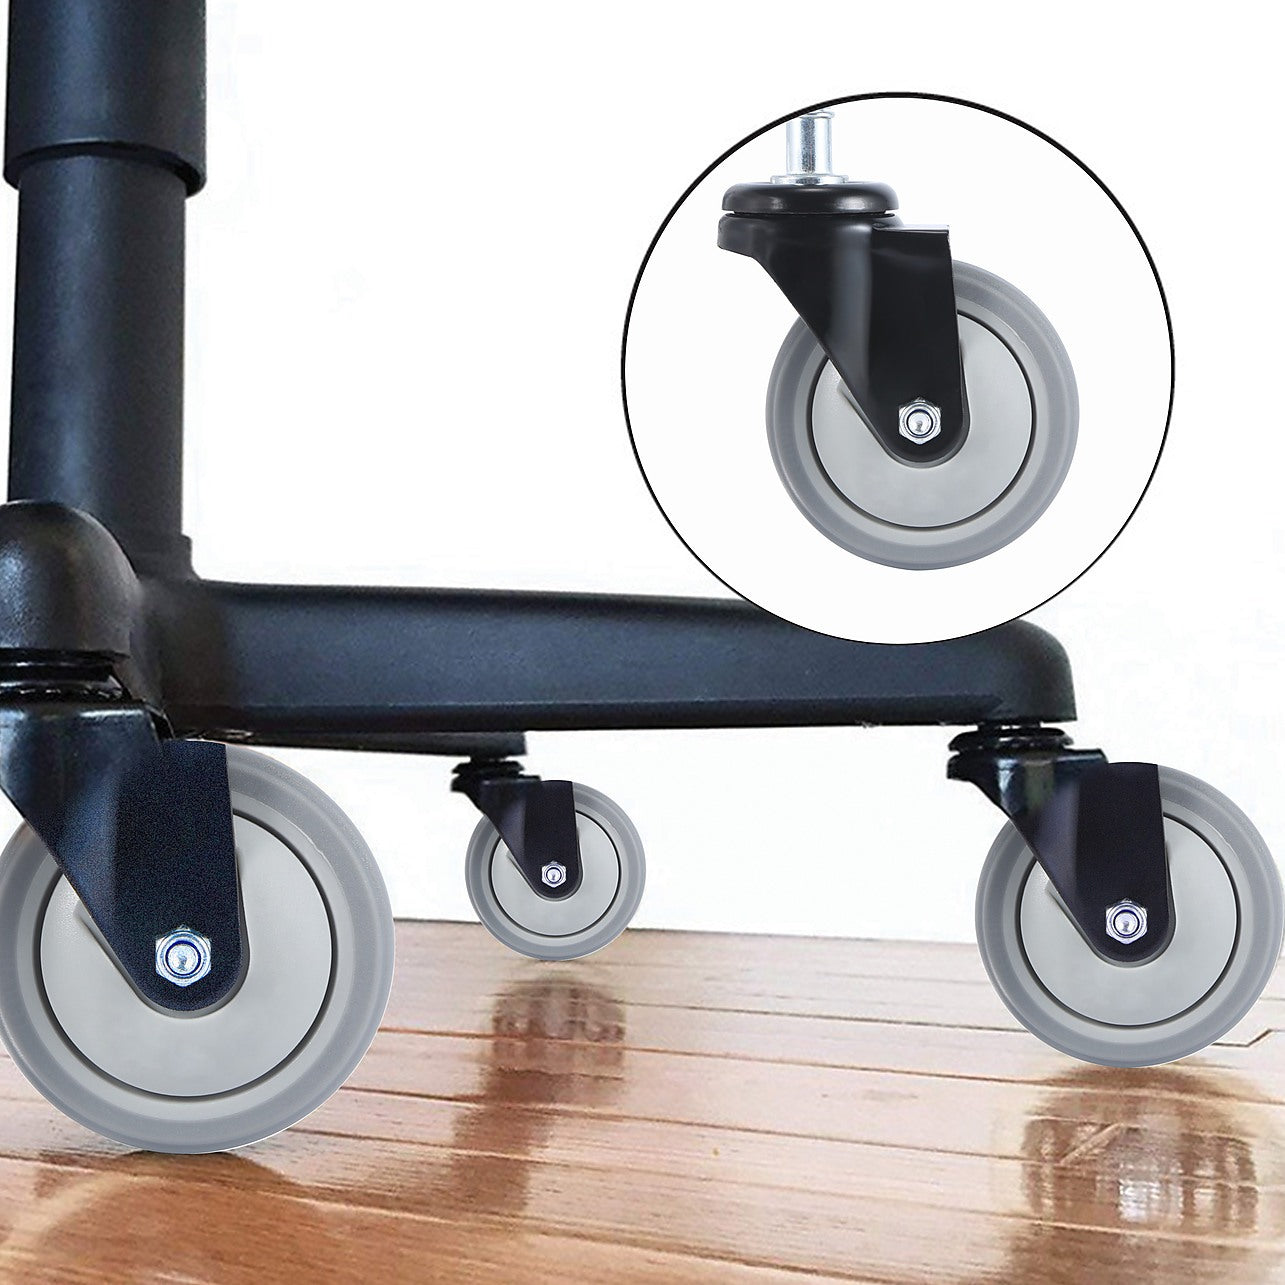 5x Office Chair Caster Wheels Set Heavy Duty  Safe for All Floors  w/Universal Fit Furniture Office Furniture Office Chair